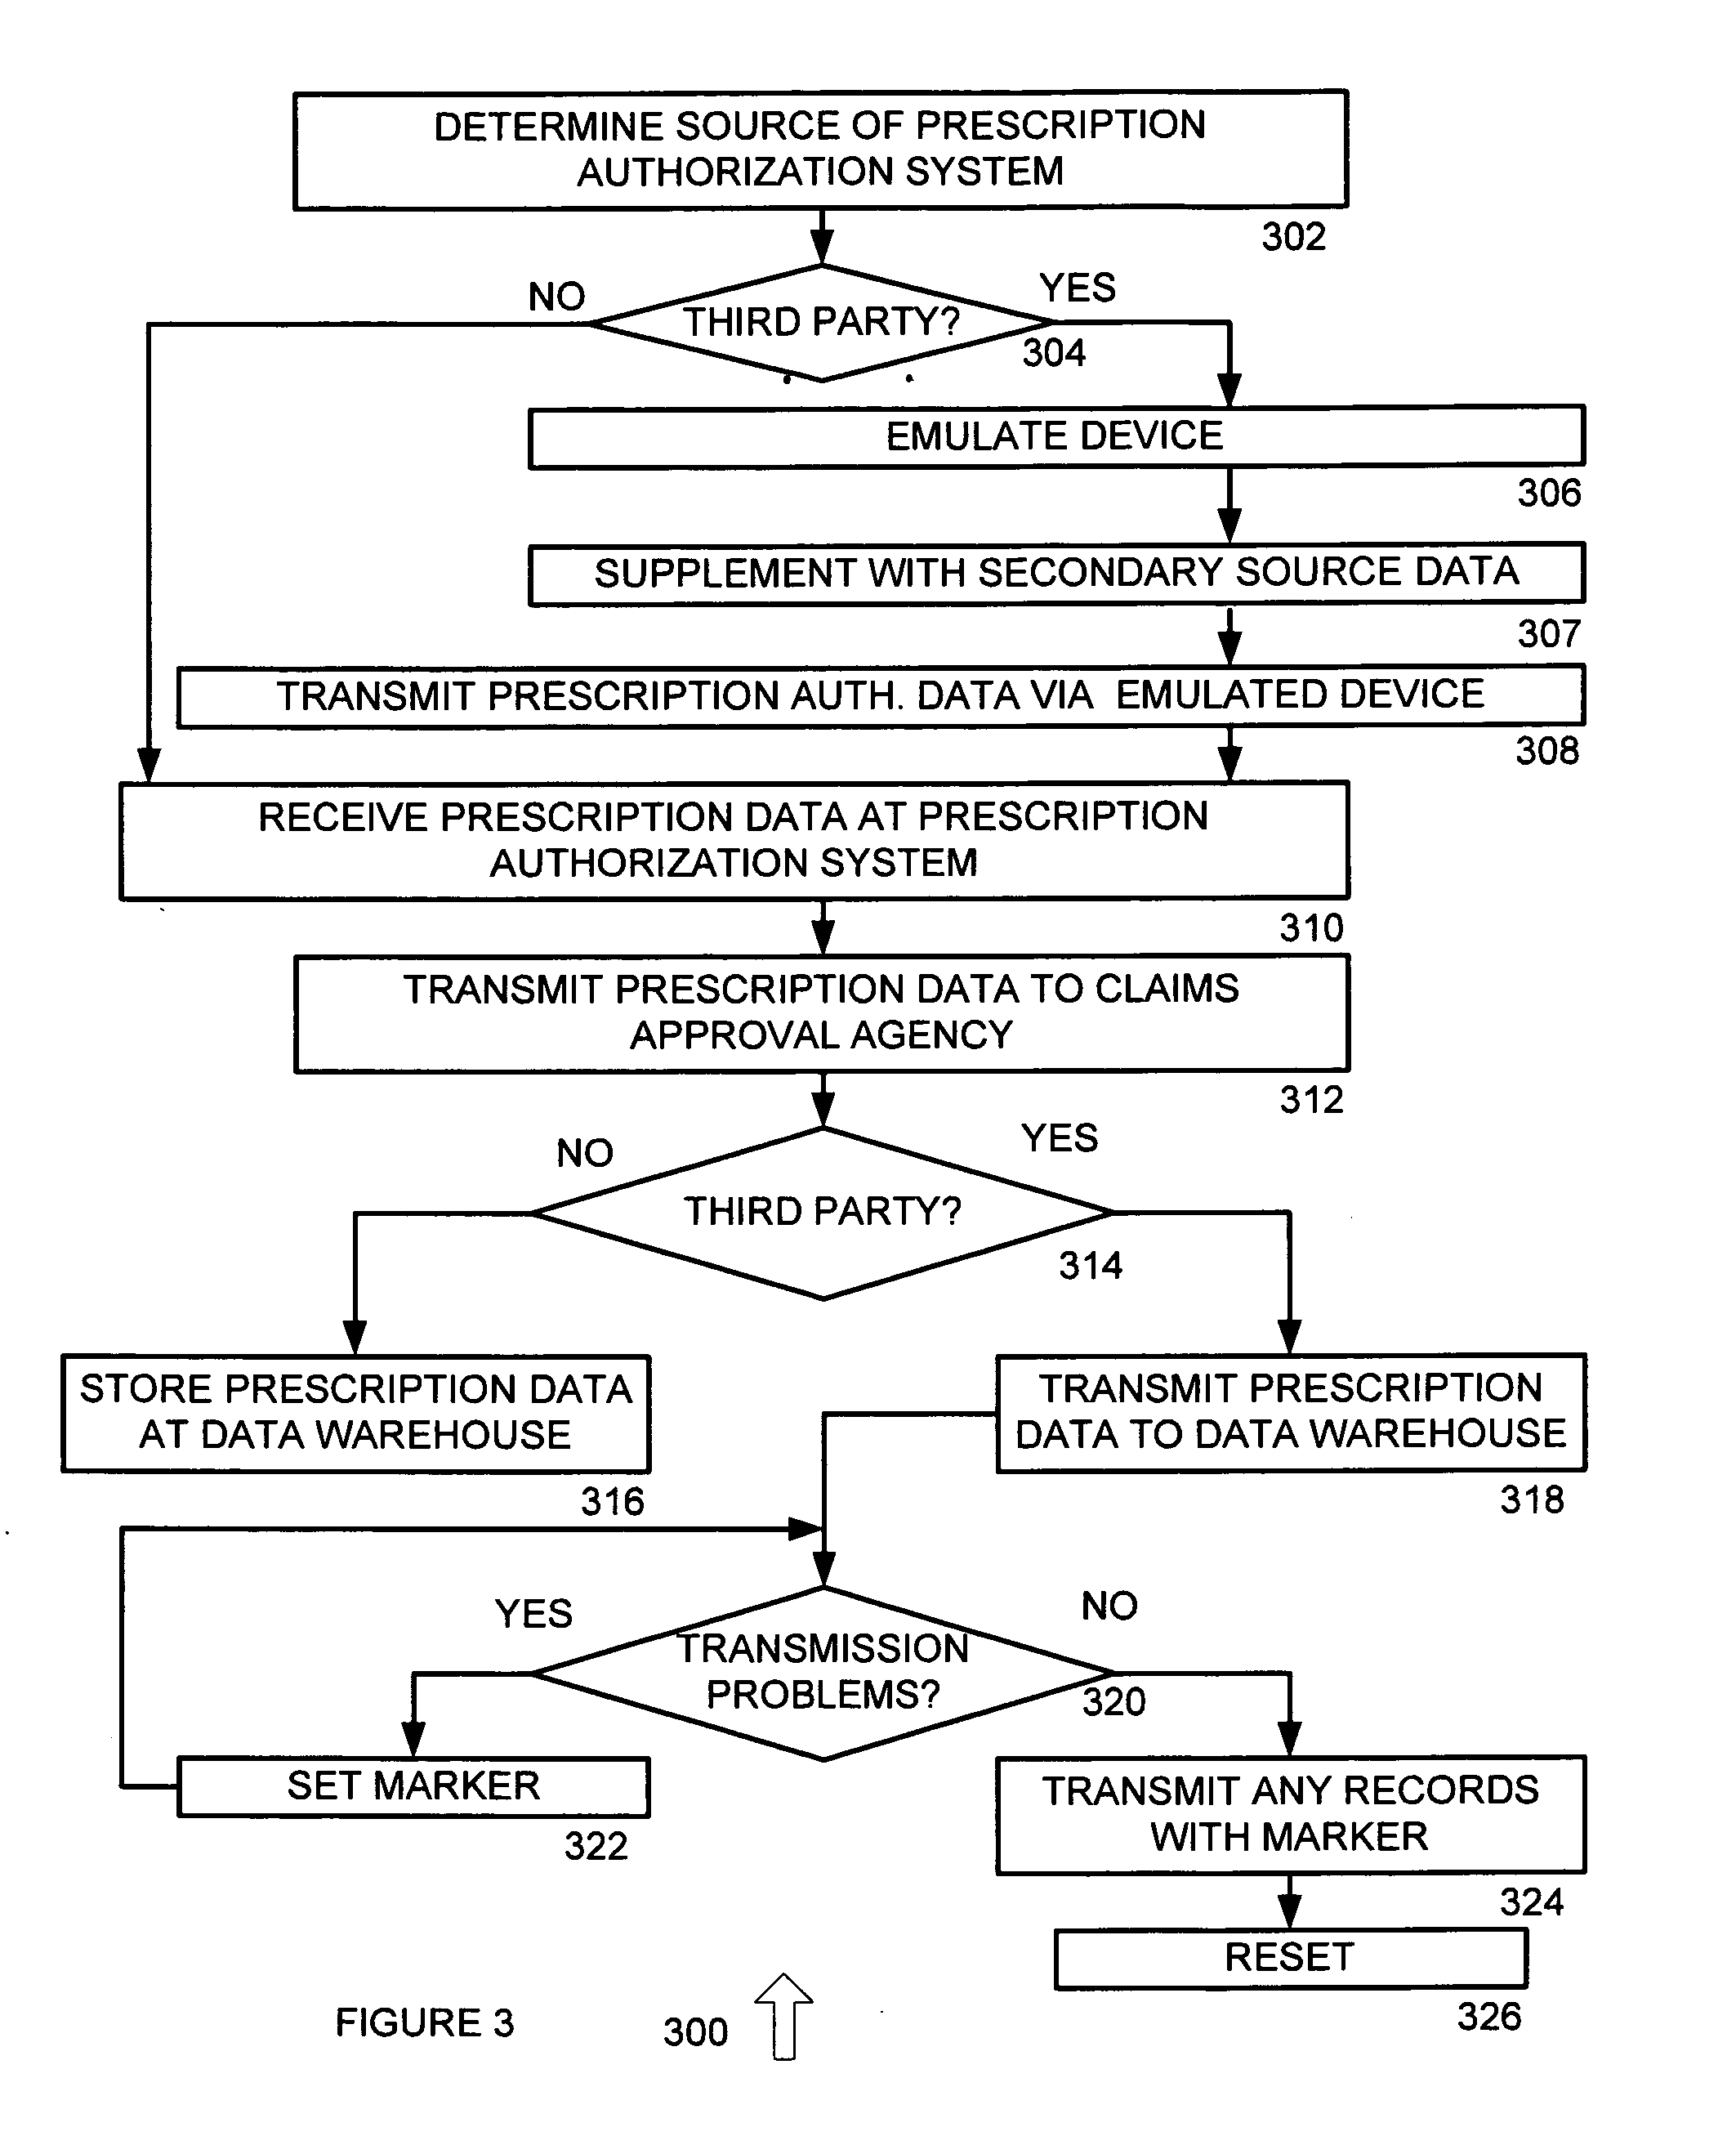 Pharmacy system data interface system and method